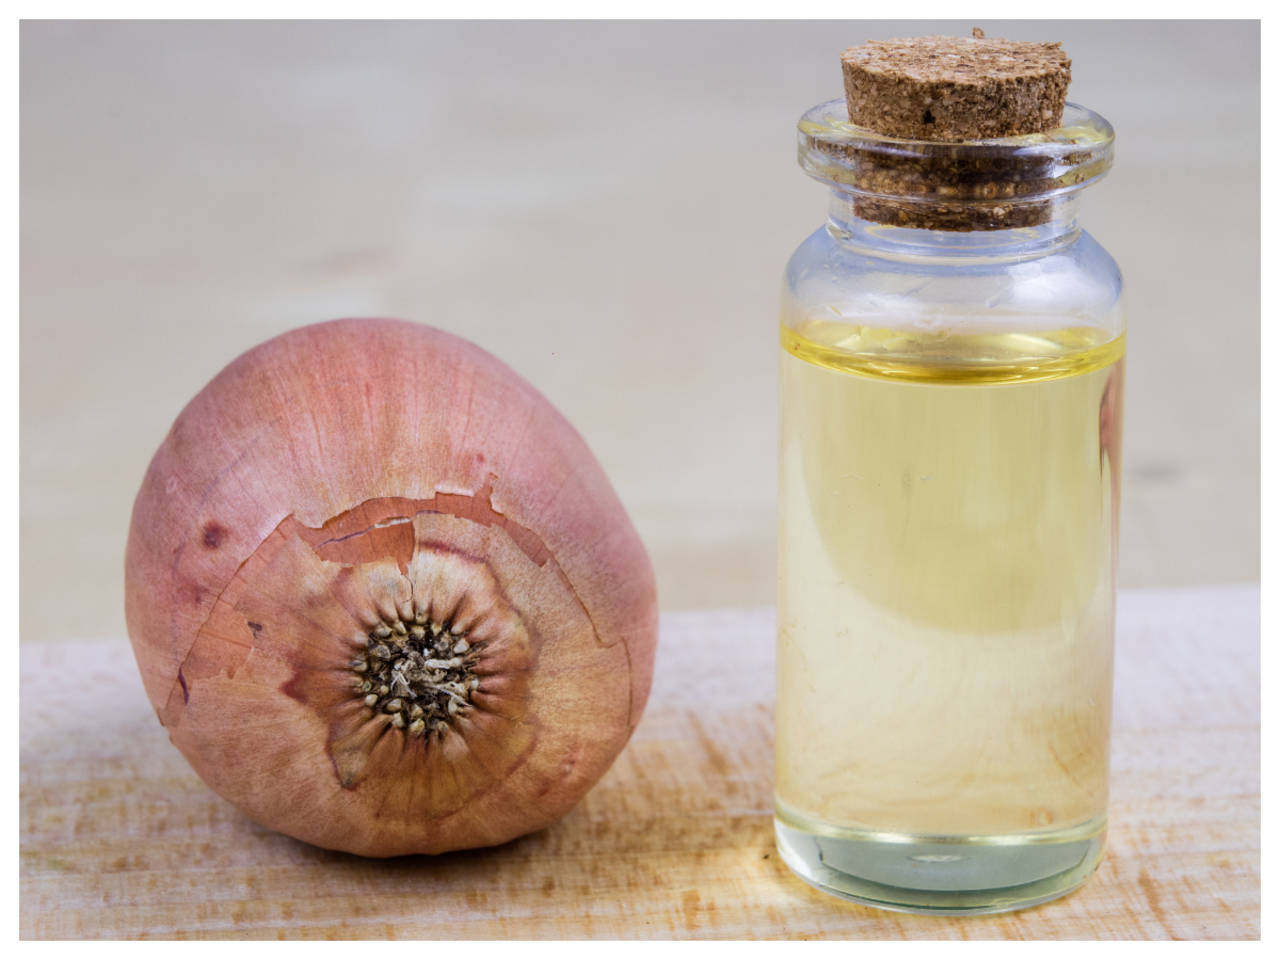 Glamouree Lifestyle  Onions are rich in substances that fight fungus and  bacteria and can keep your hair free of infections and improve hair  growth Have you tried onion juice on your